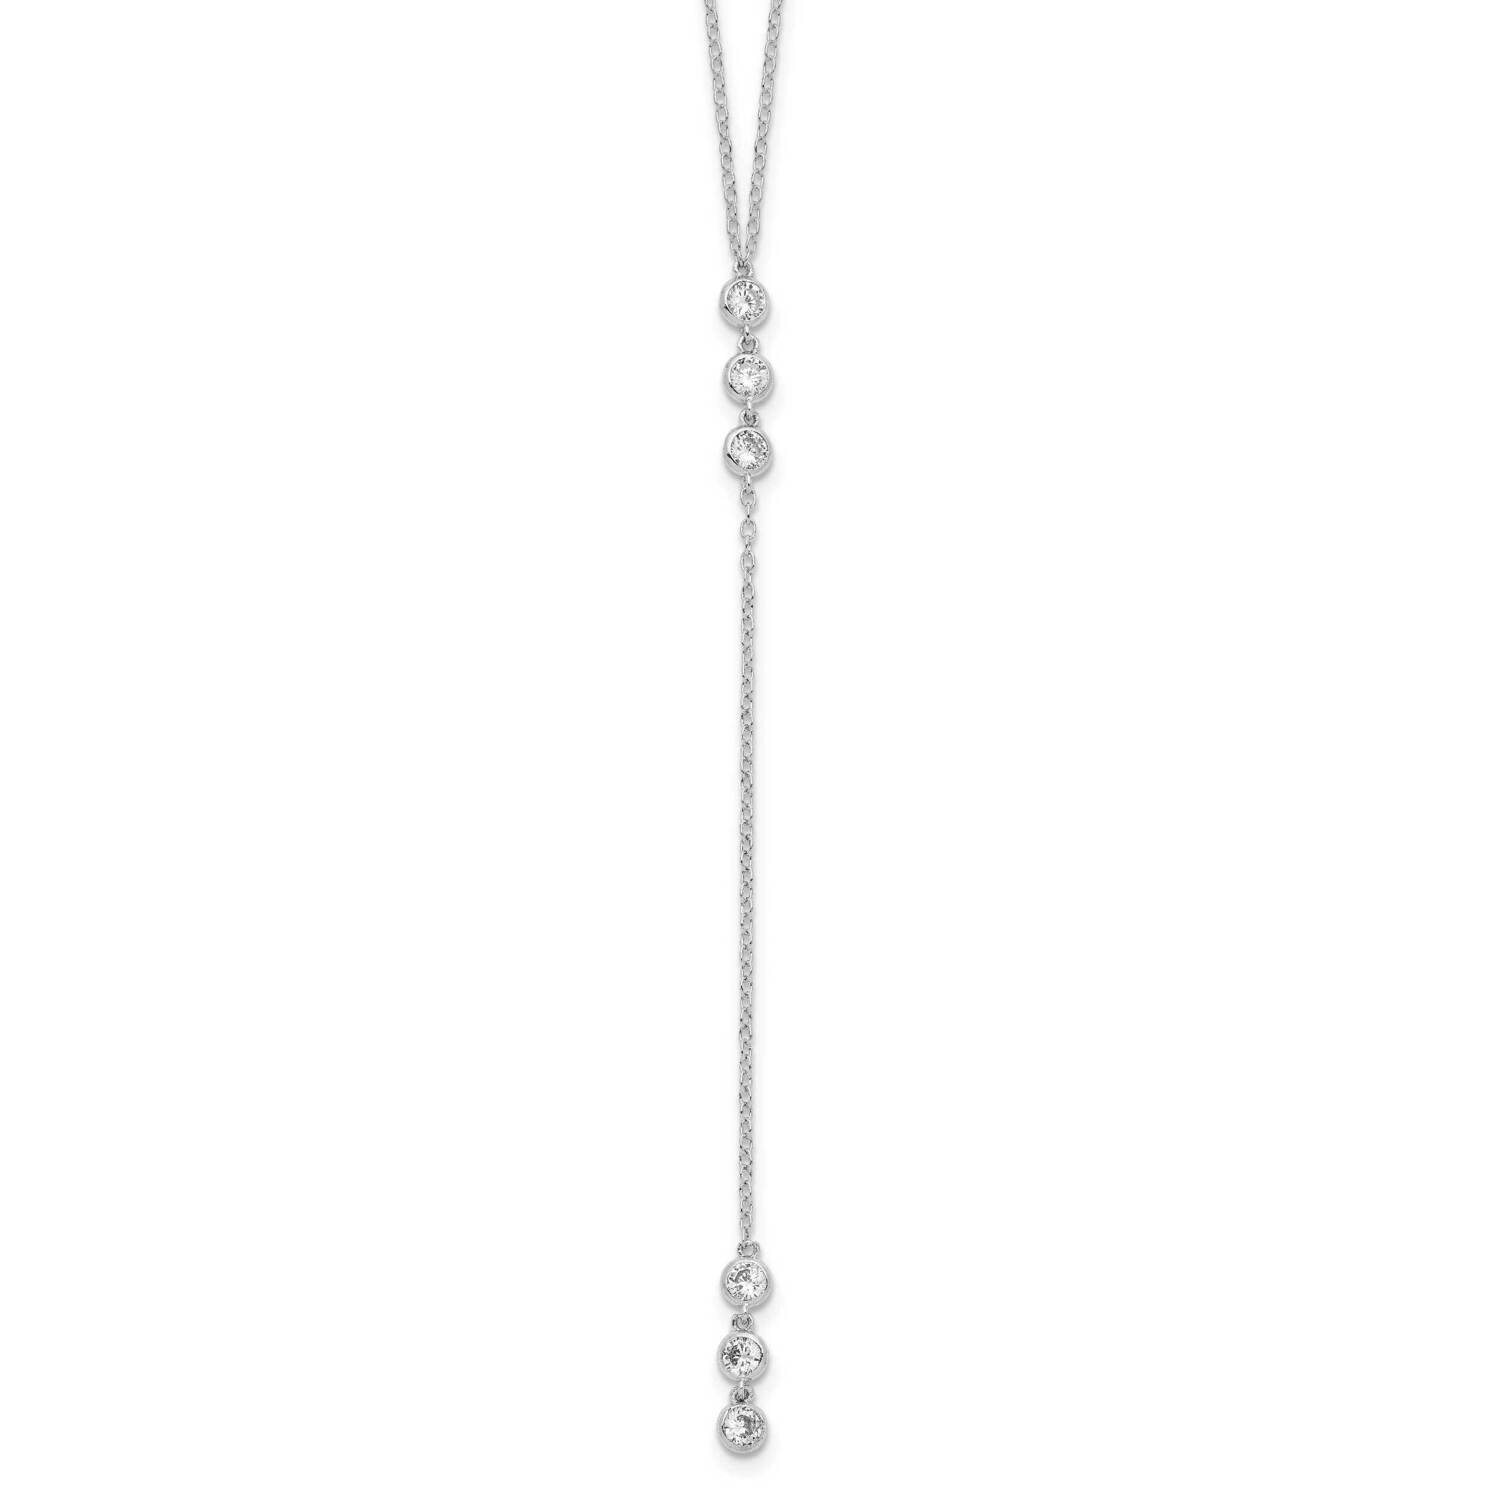 Polished Bezel Set CZ with 2 Inch Extension Necklace Sterling Silver Rhodium-Plated QG6035-16